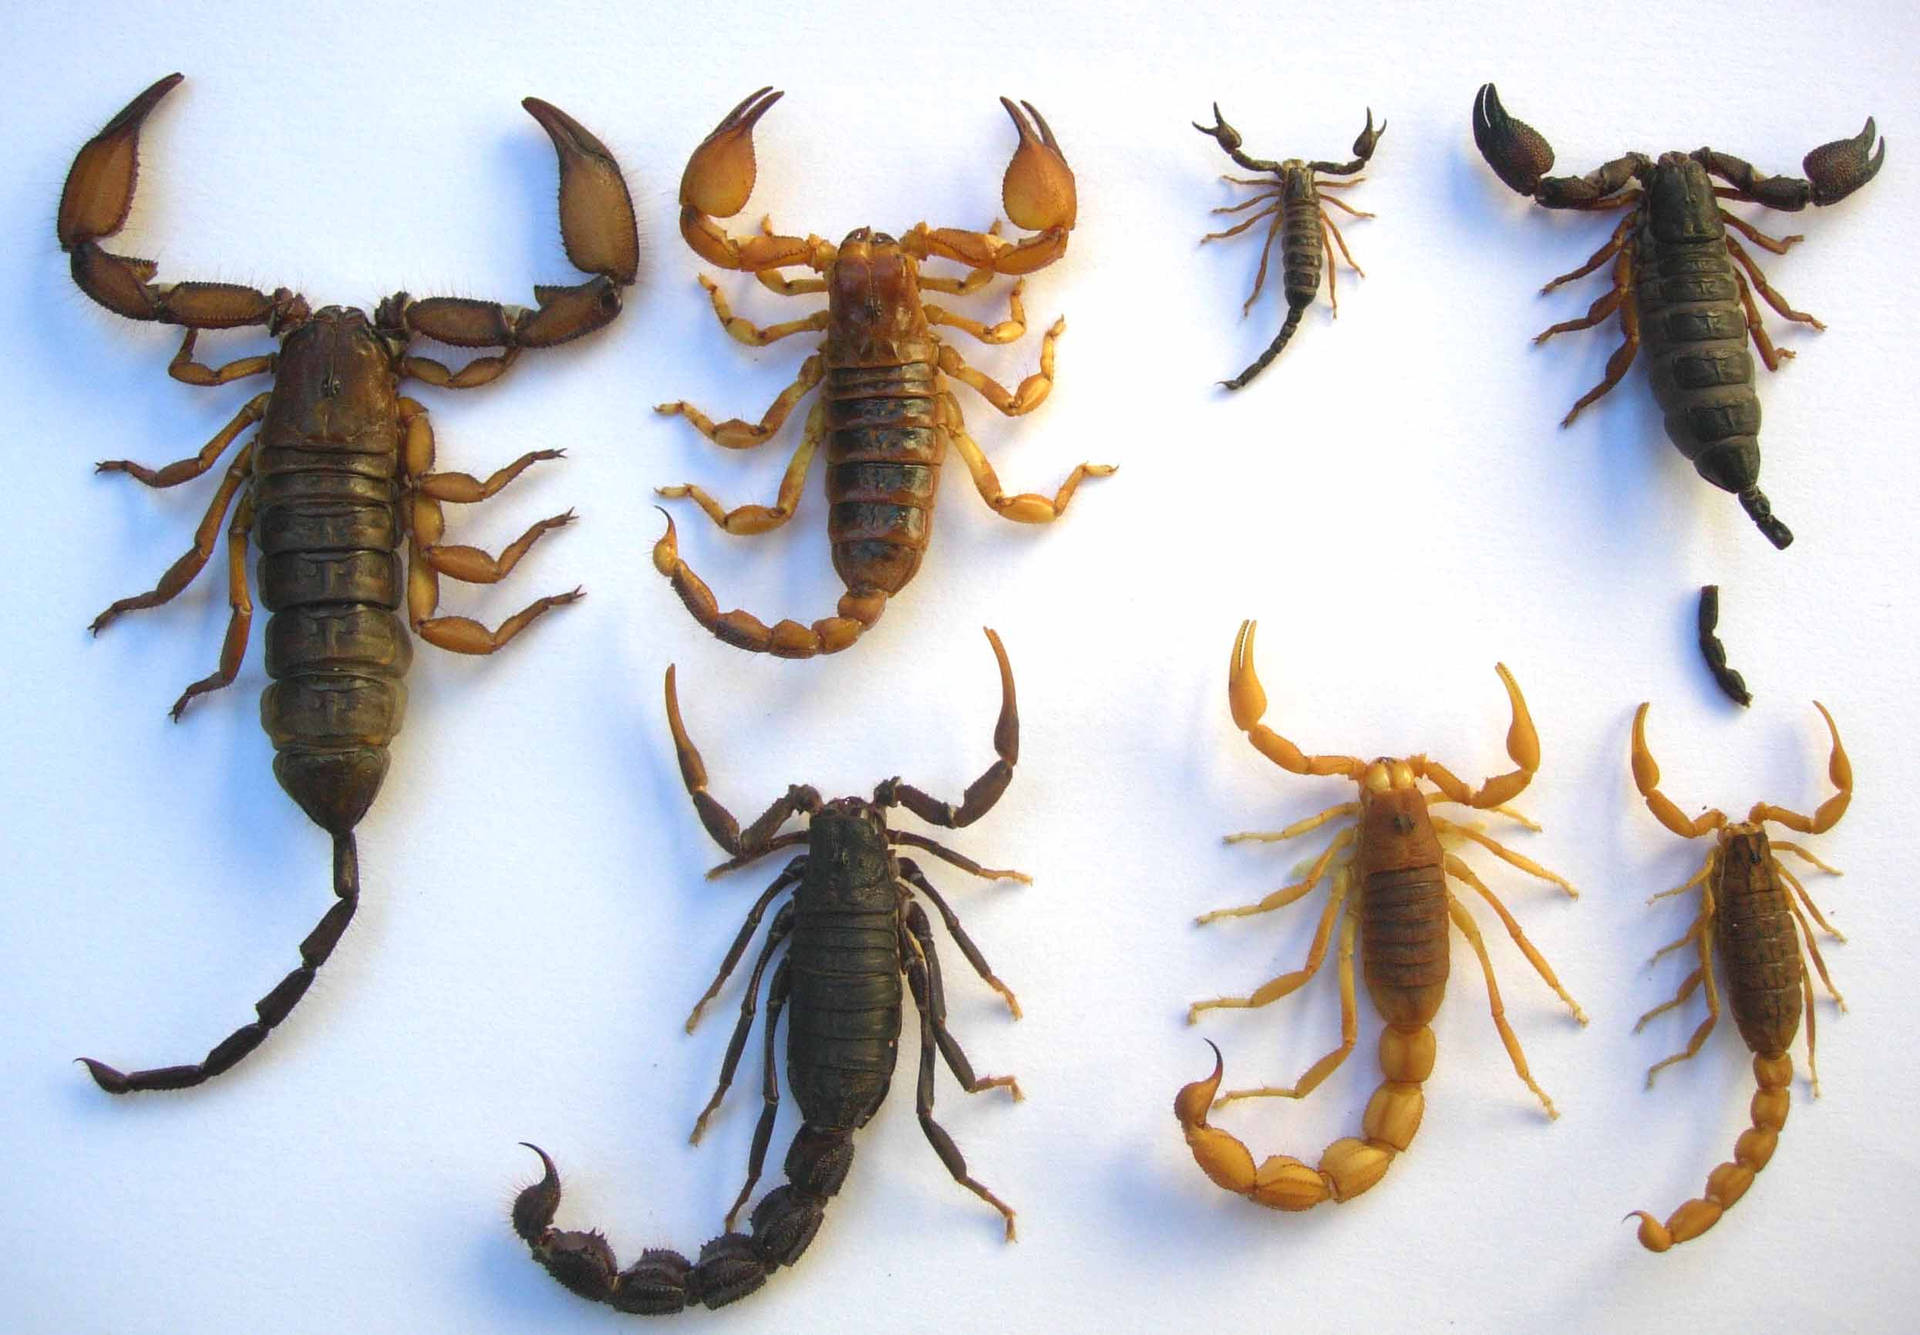 A Collection of Scorpions of Varying Sizes on a White Background Wallpaper